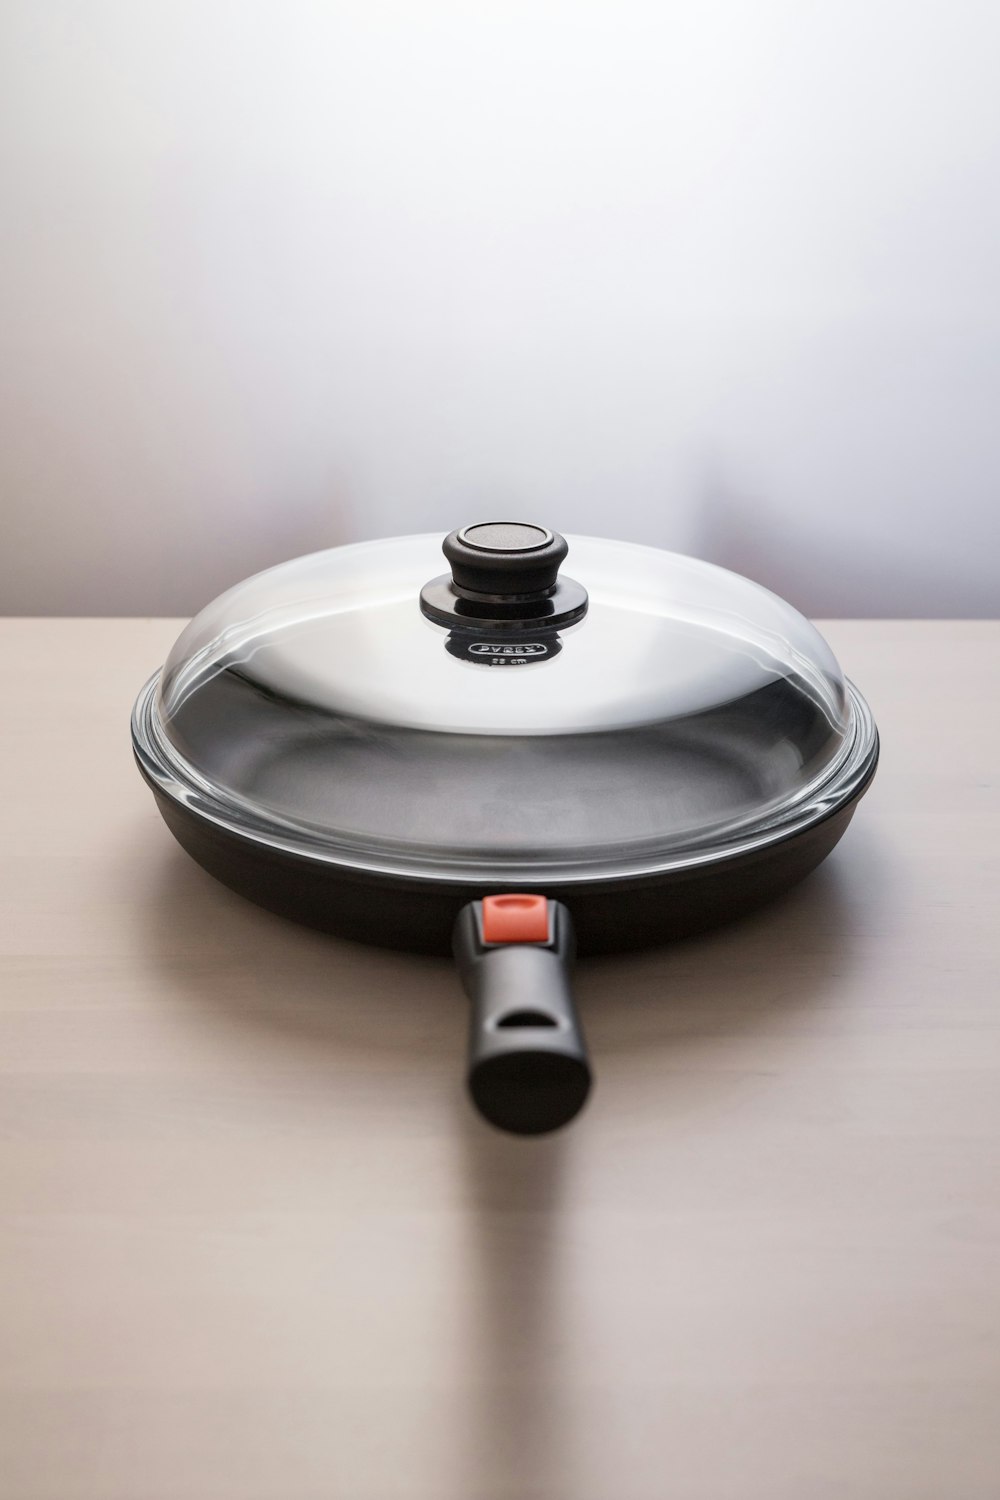 a silver pan with a black lid on a wooden table